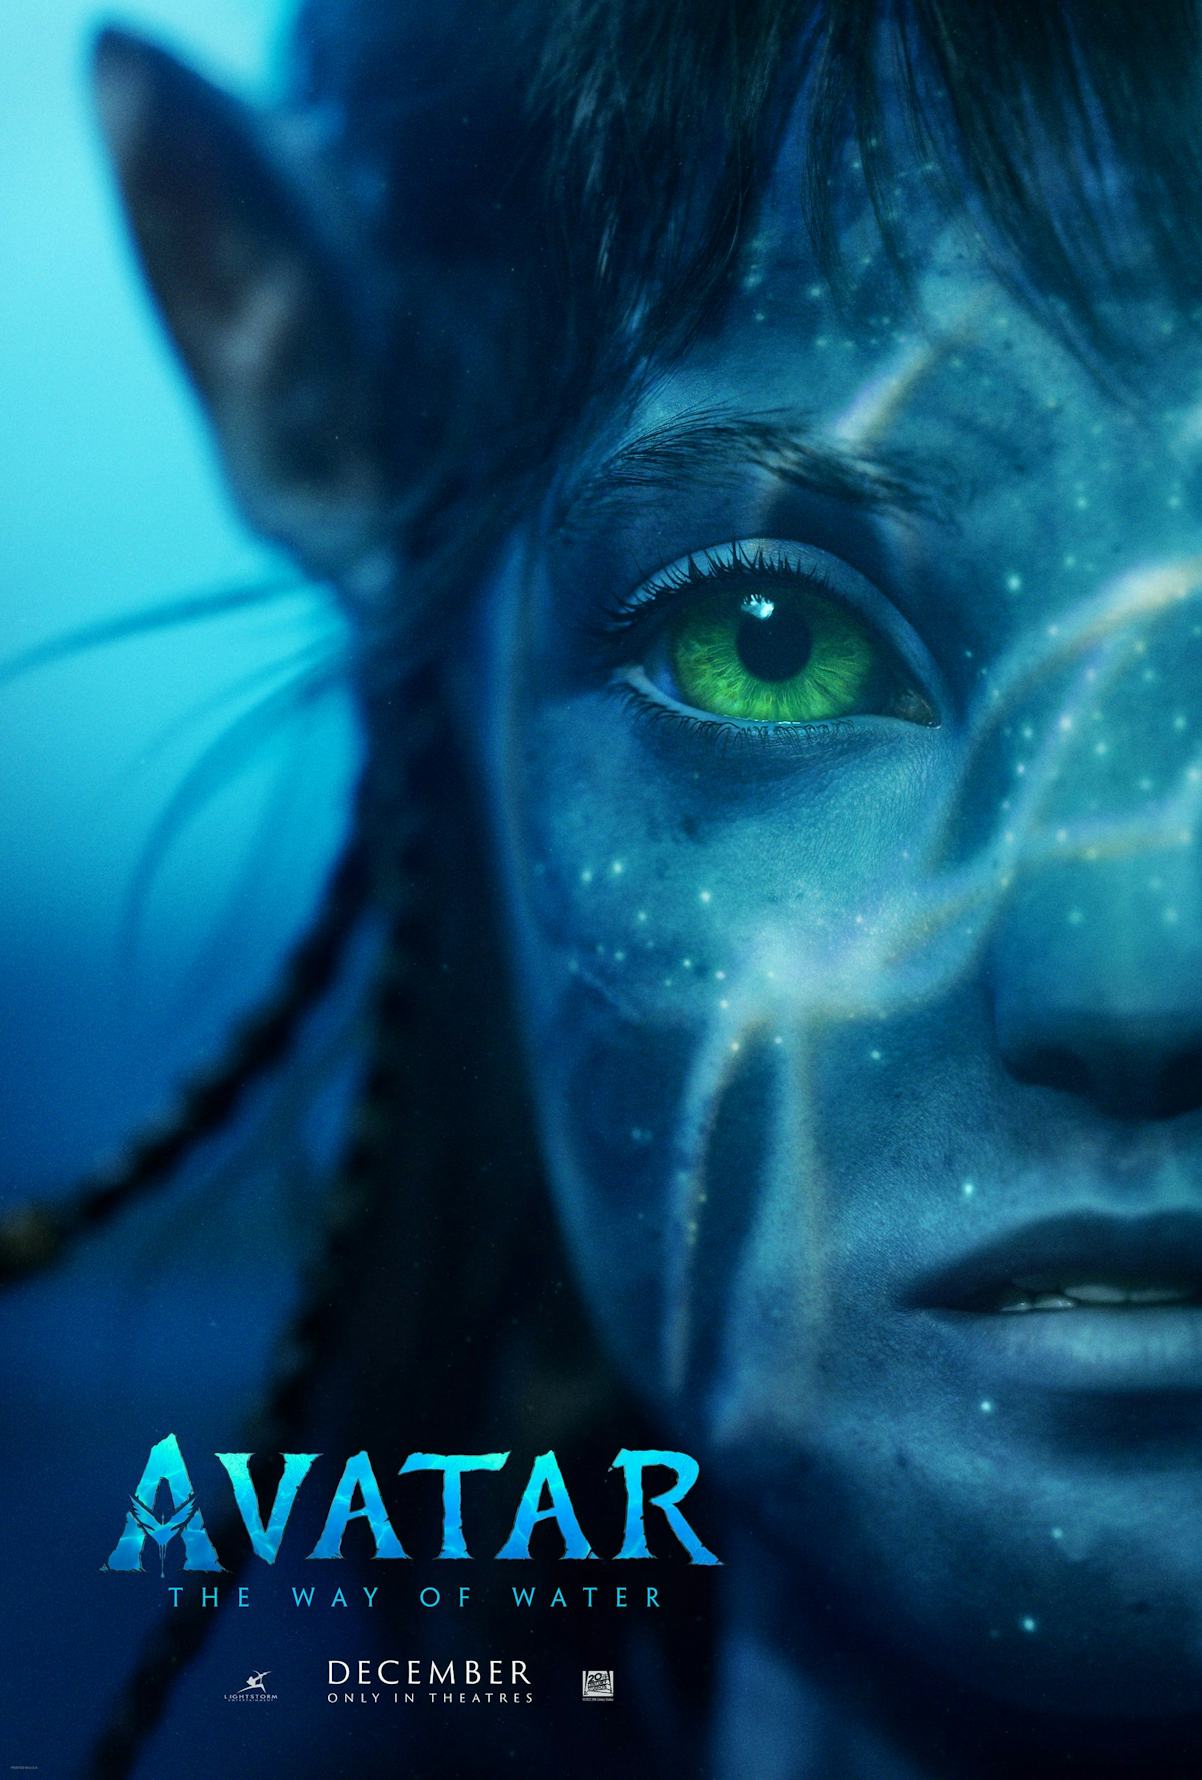 Avatar 2 Release Date Cast Trailer And Plot For The Way Of Water 2236